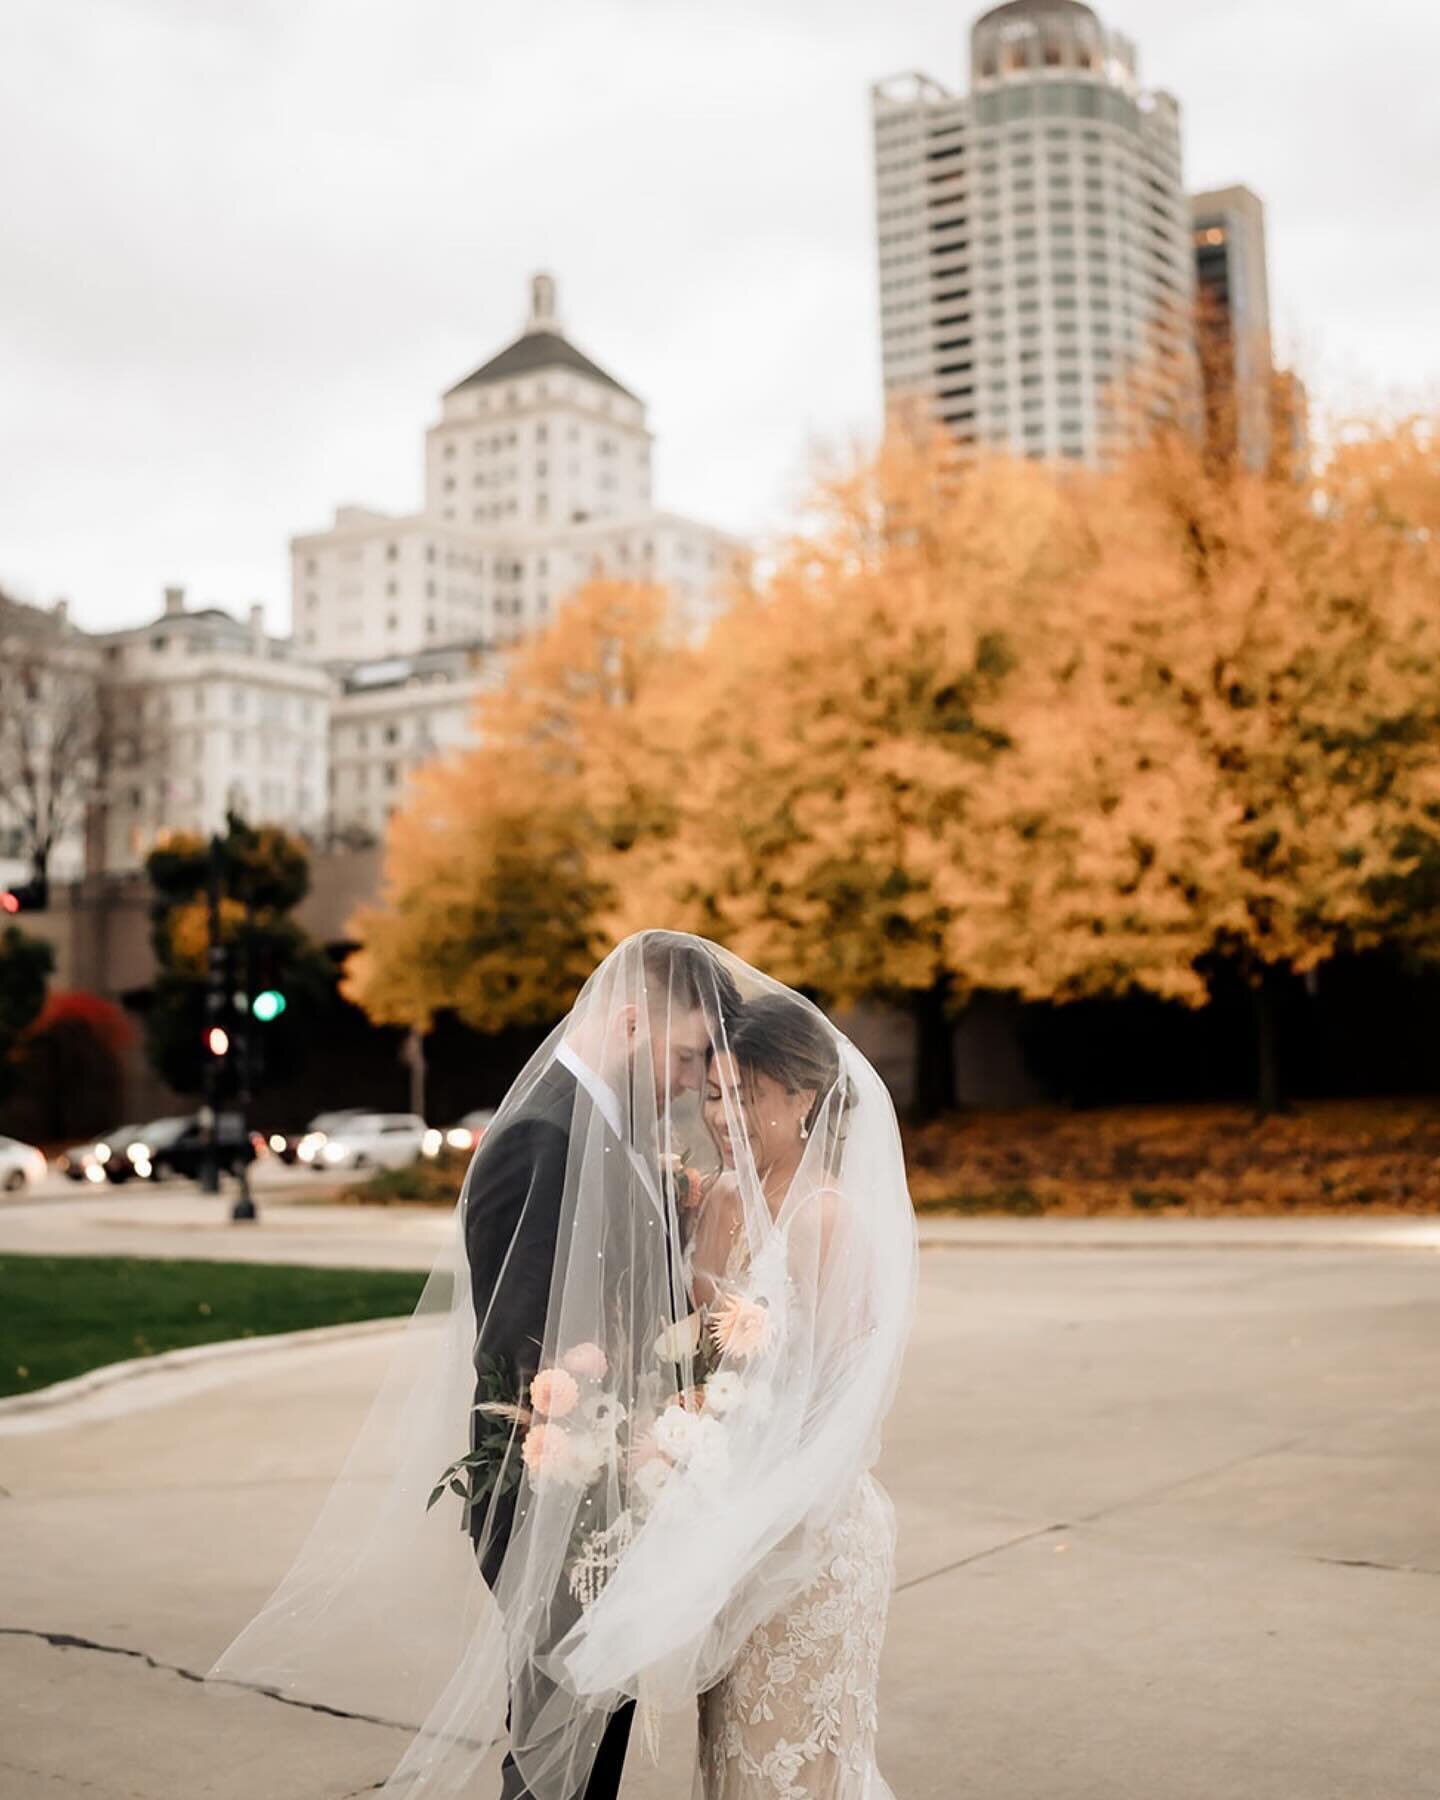 Does it get better than fall colors and twinkly city lights?! Loved that we found some time to sneak away to get some pretty blue hour photos with Emily and Andy! 

Vendors: 
@remingtonsflowers 
@rustiqueswan 
@pritzlaffevents 
Video: @dolisterfilms
